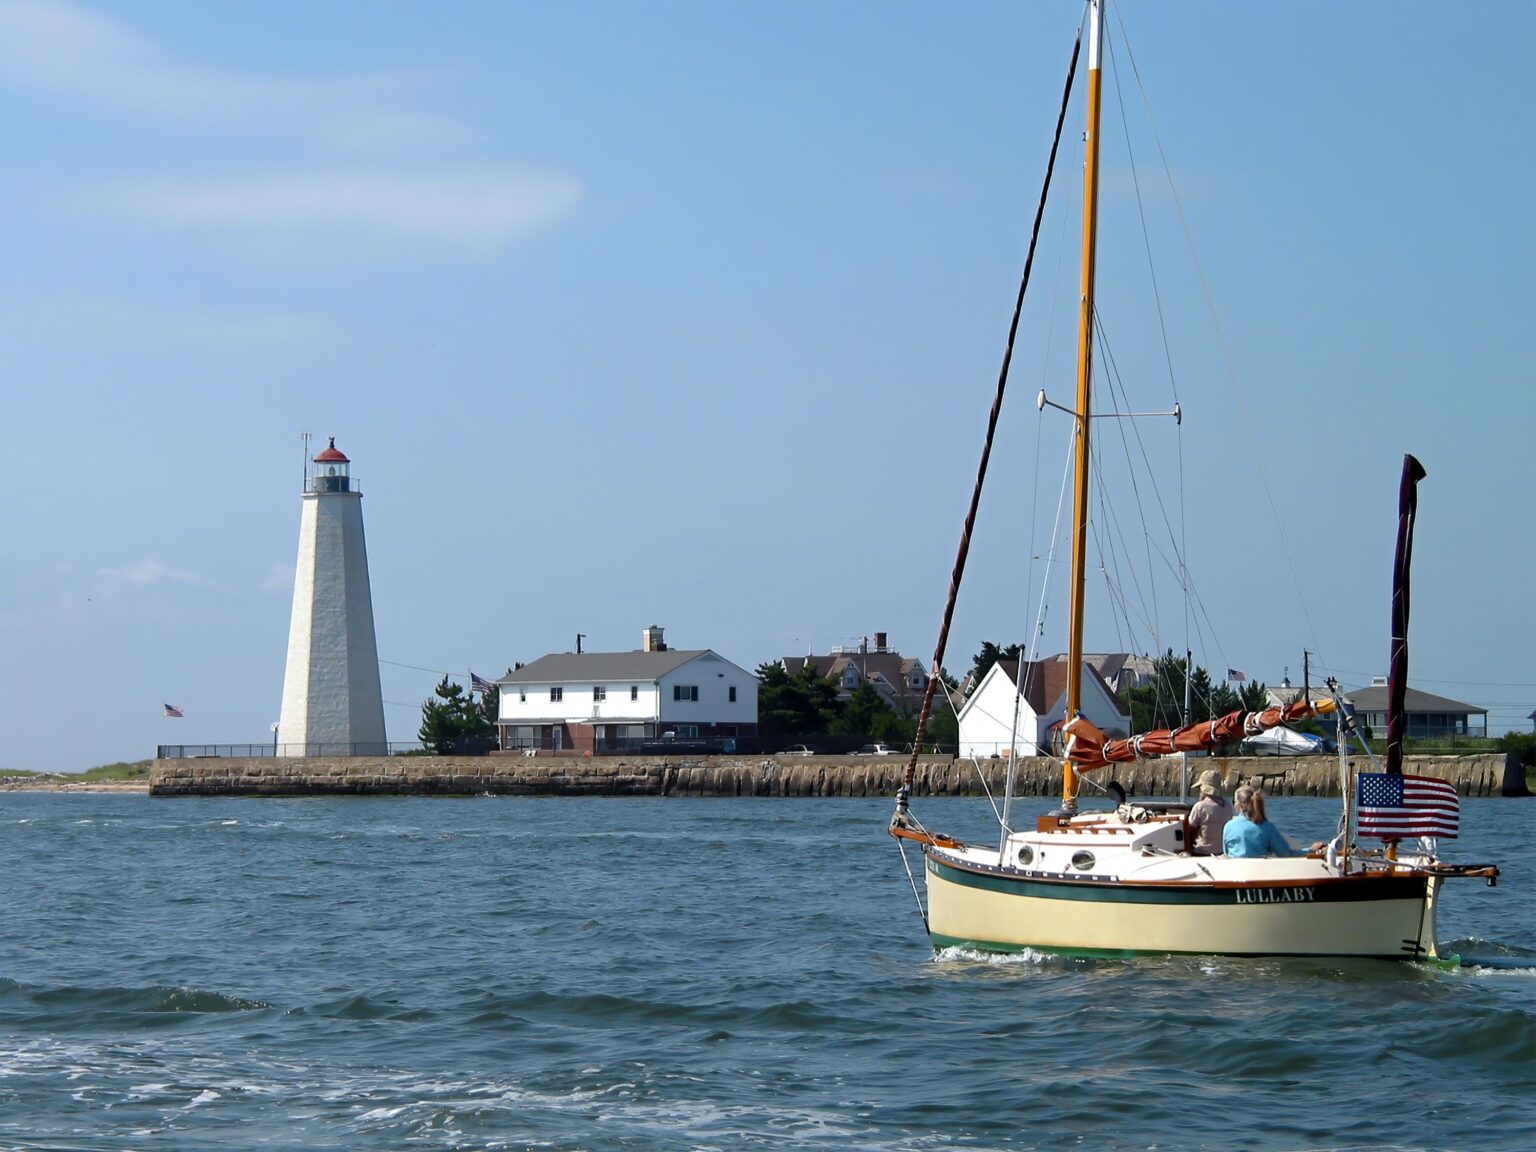 A Sailboat on the Sea Near the Lighthouse in Connecticut